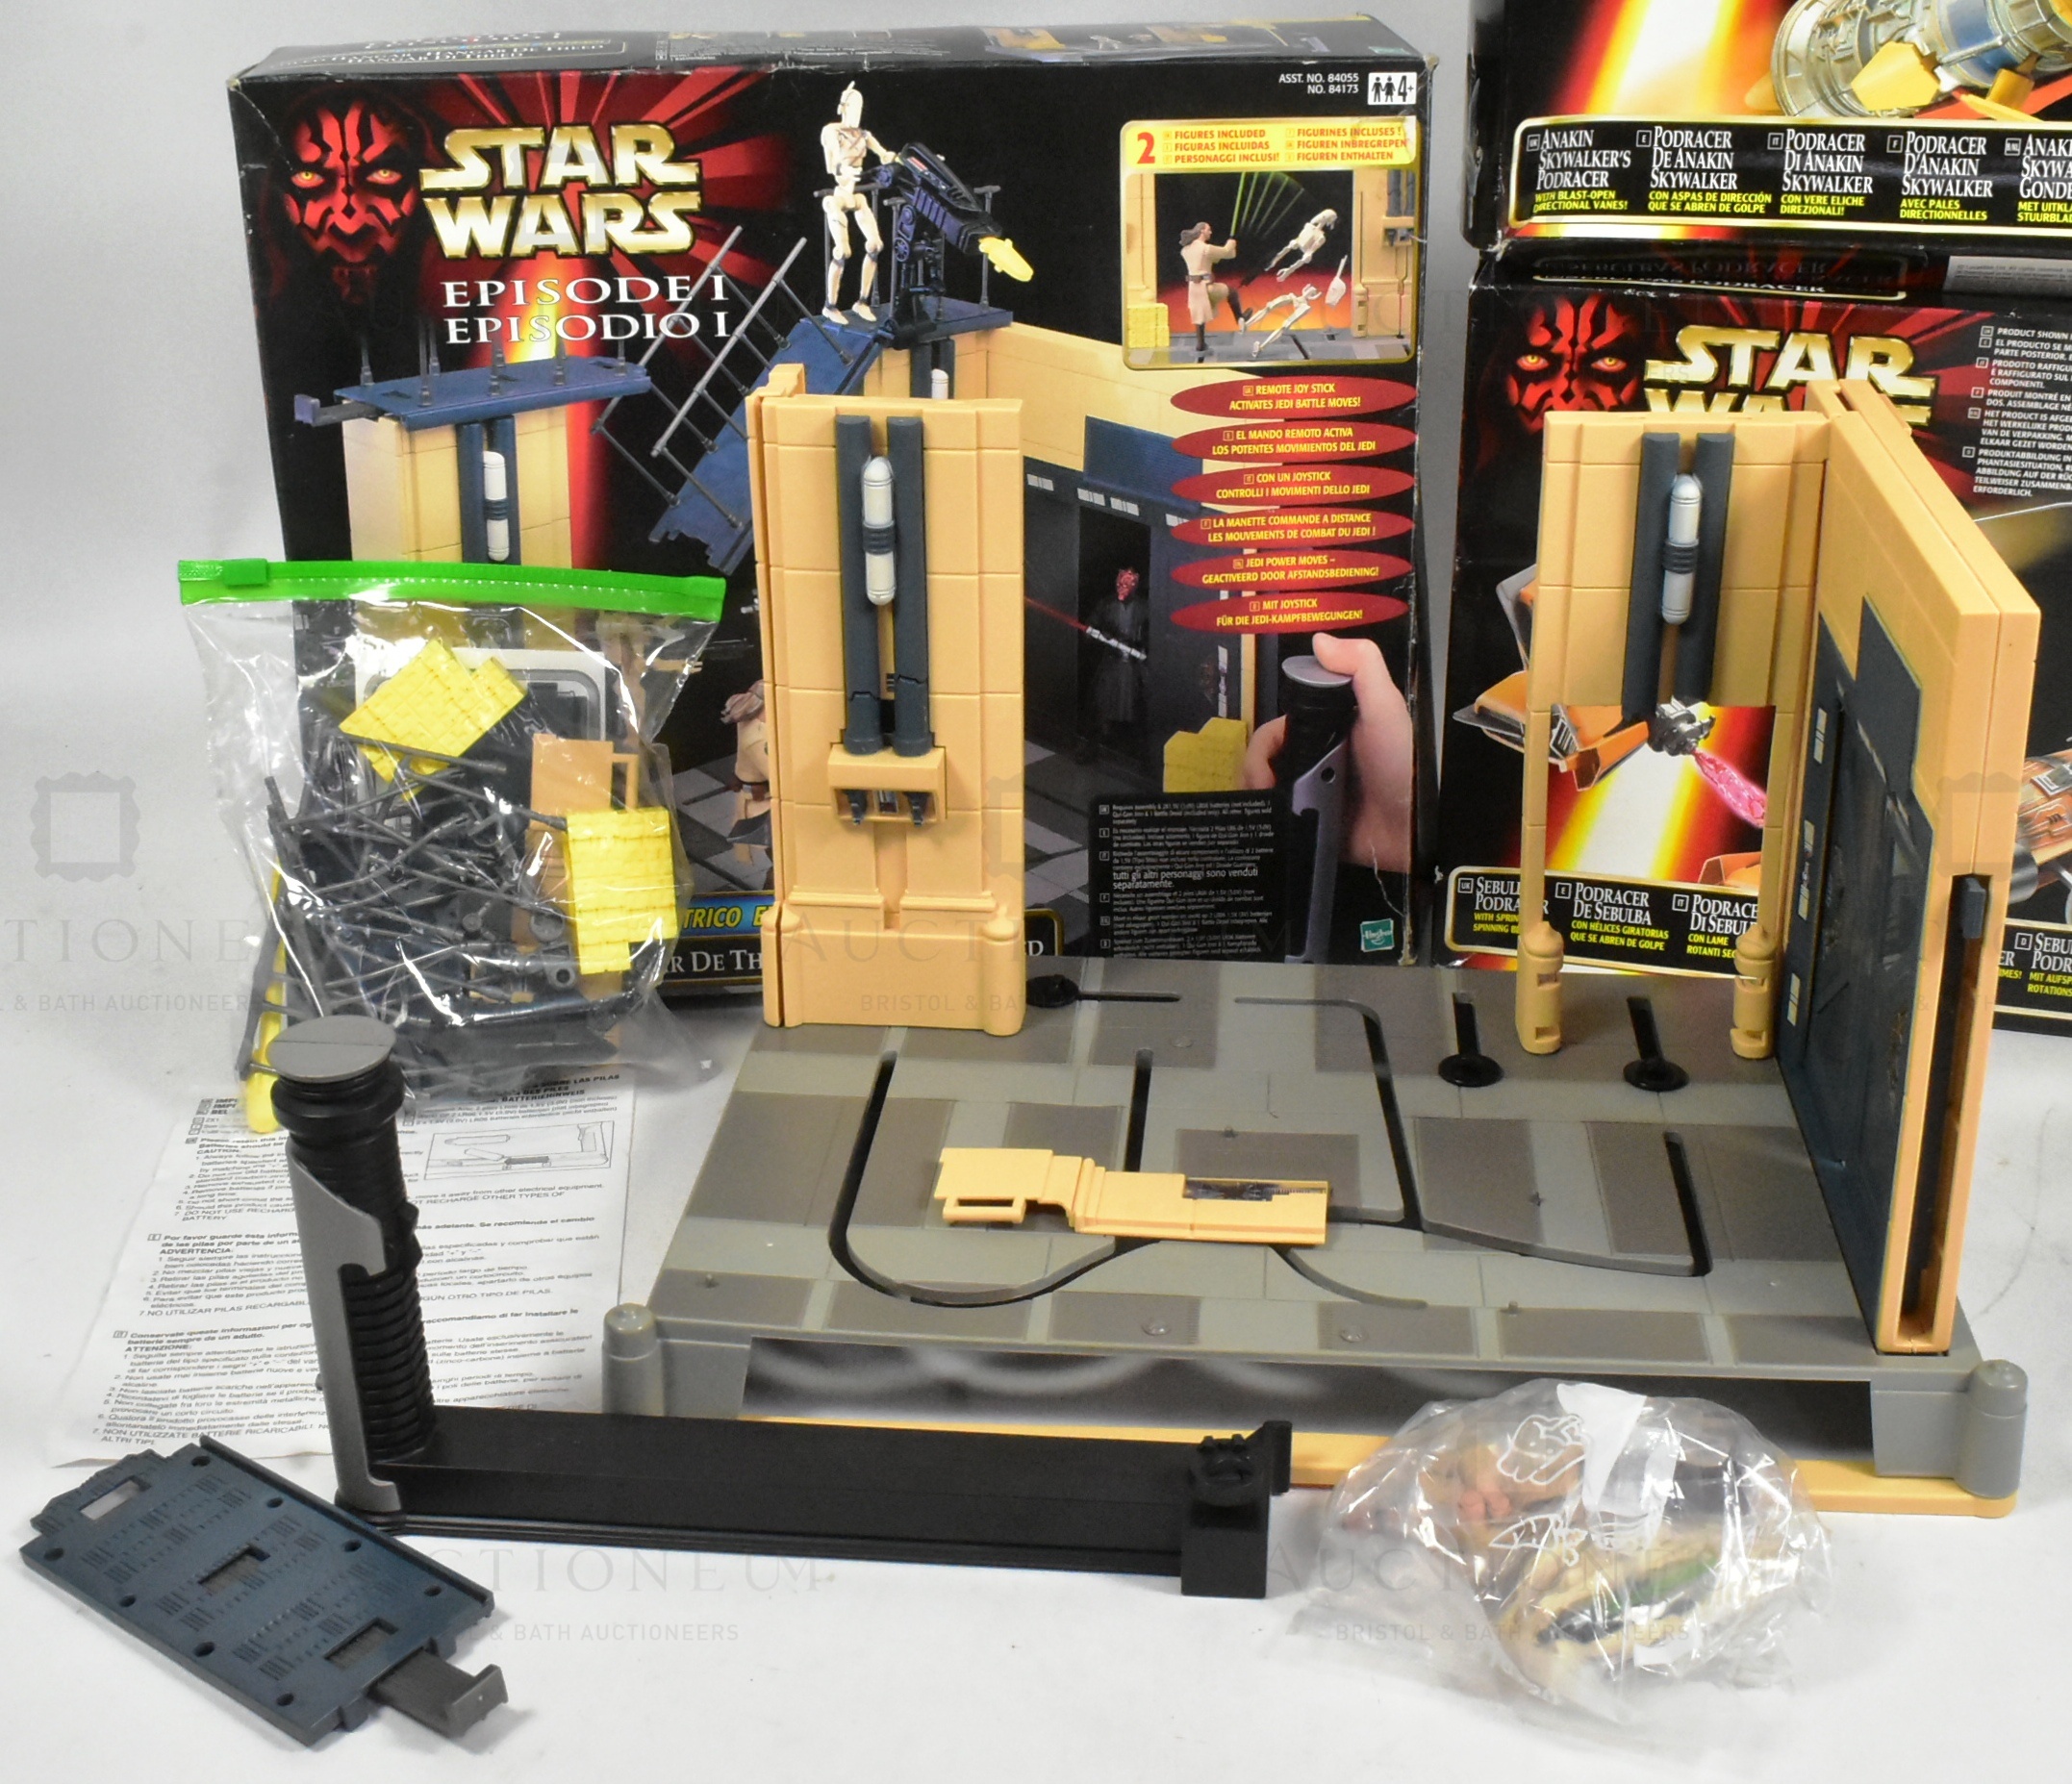 STAR WARS - EPISODE I - COLLECTION OF ACTION FIGURE PLAYSETS - Image 2 of 4